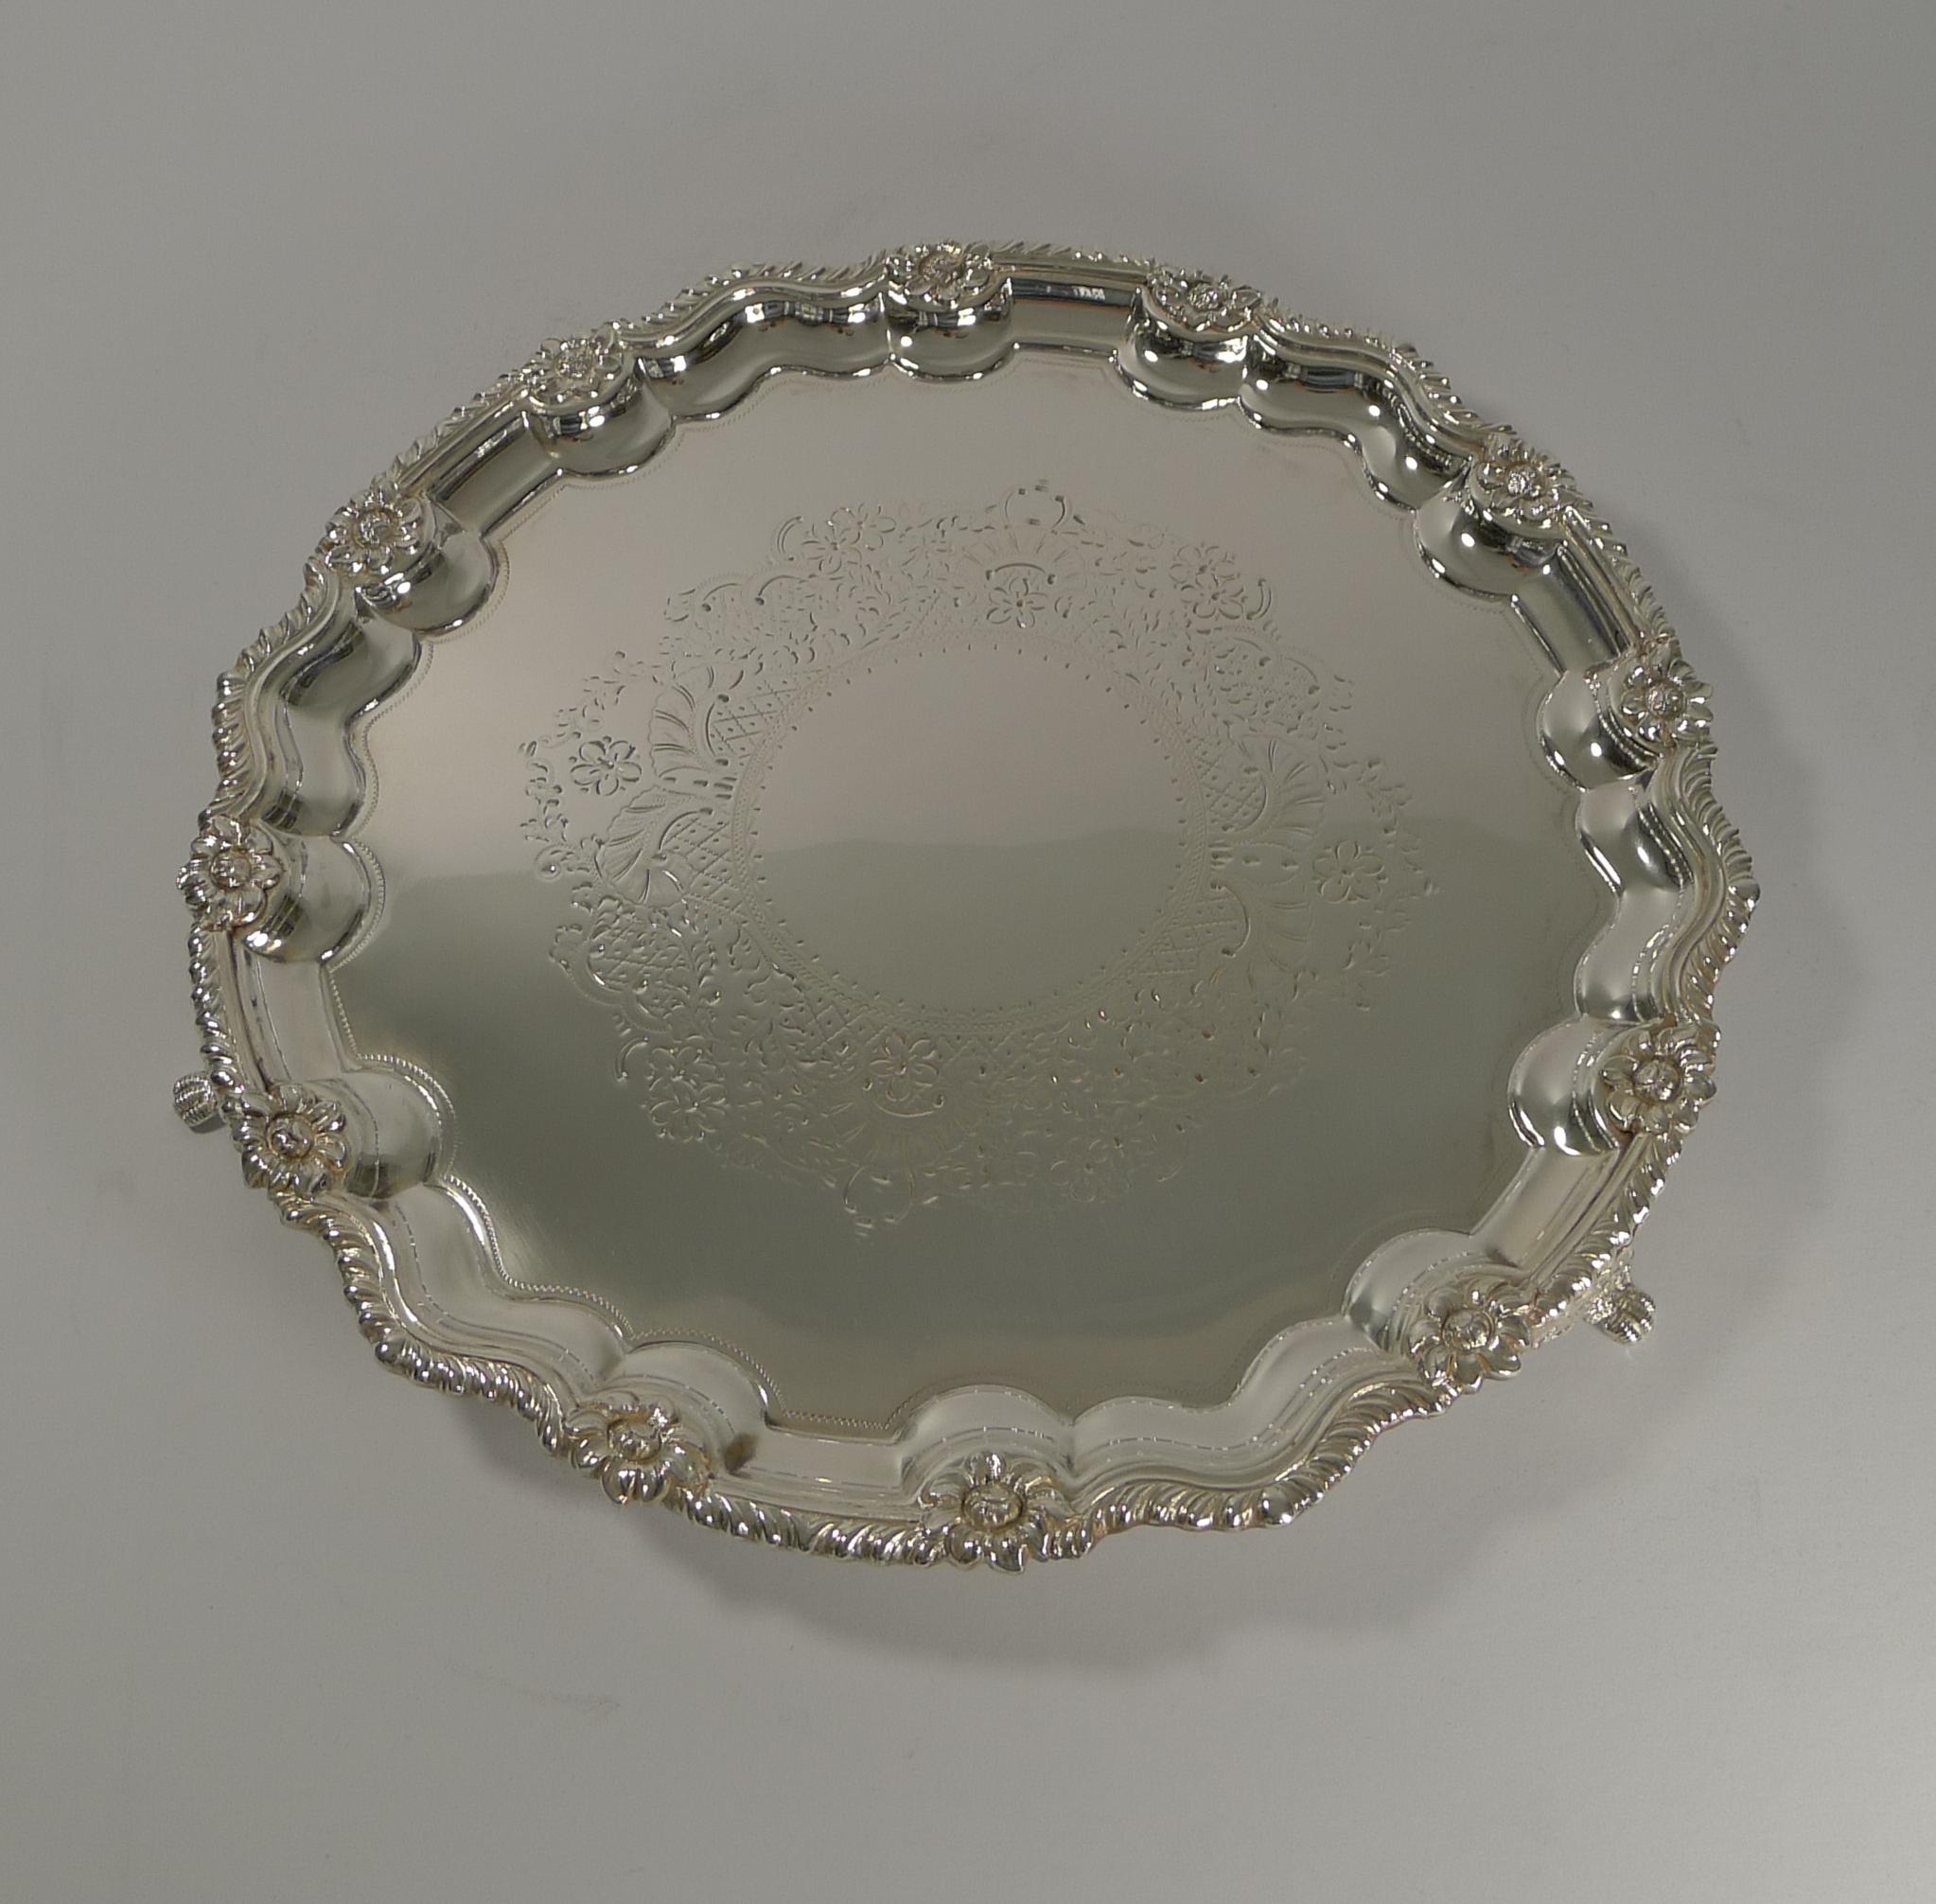 A very elegant late Victorian silver plated drinks salver or tray, perfect to serve cocktails or even hors d'oeuvres.

Standing on three lovely feet, the centre of the tray with an engraved decoration and the shaped edge with a wonderful raised